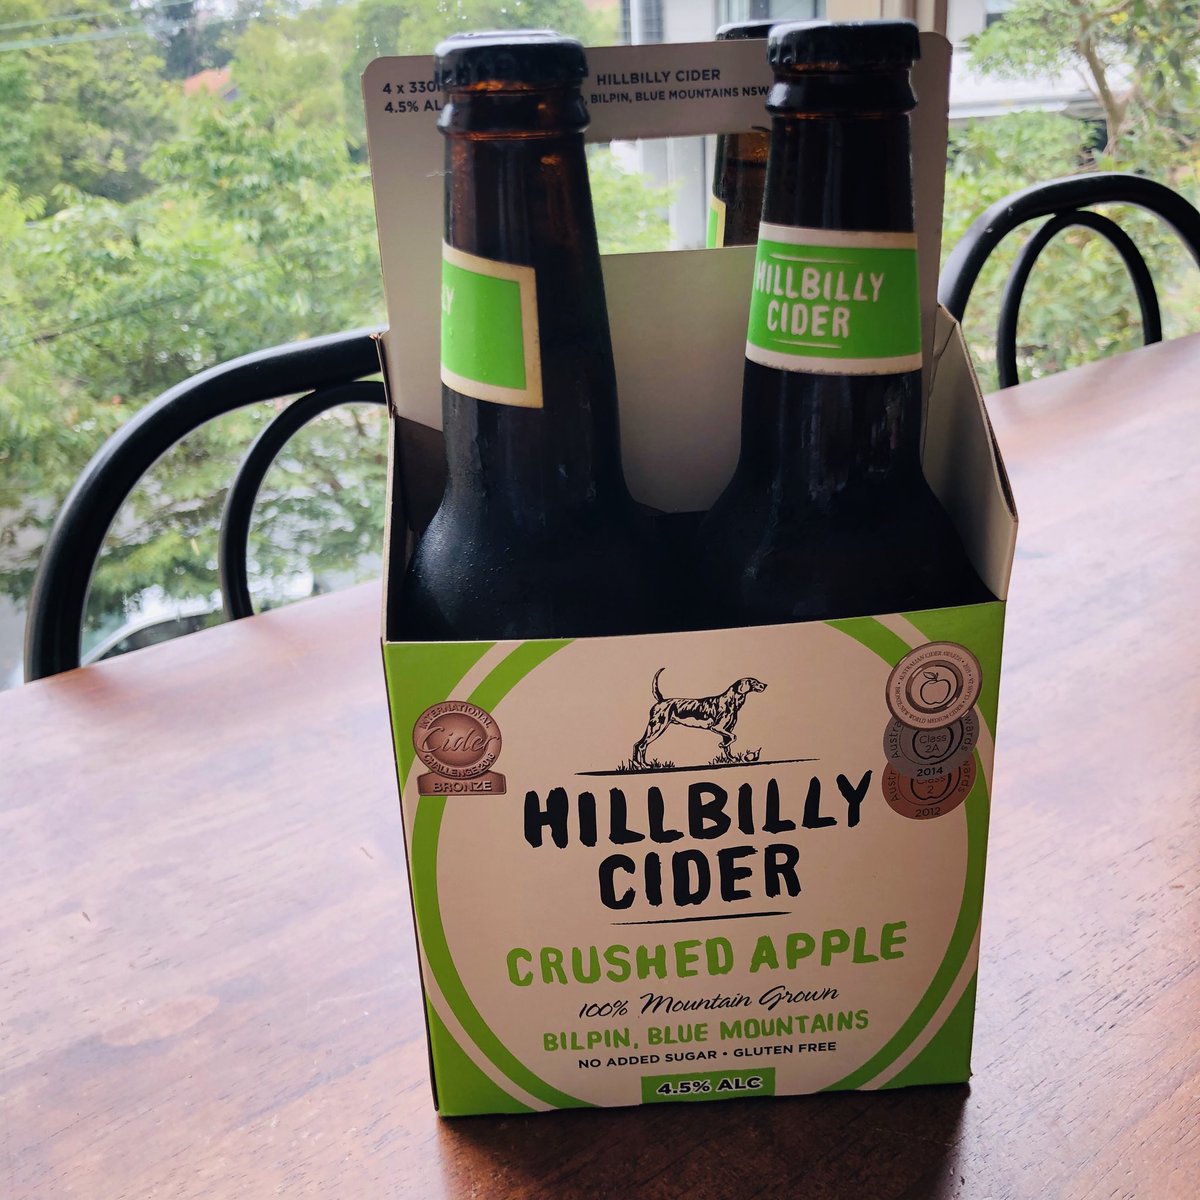 Now is the time to #BuyAustralian, especially from areas directly affected by the fires like #Bilpin.

Aussies – time for a ⁦@HillbillyCider⁩ 🍏💚

O/seas followers, pls RT 🙏🏻

#AustralianBushfireDisaster #AustralianFires #AustraliaBurns #Bilpin #NSWbushfires #Australie